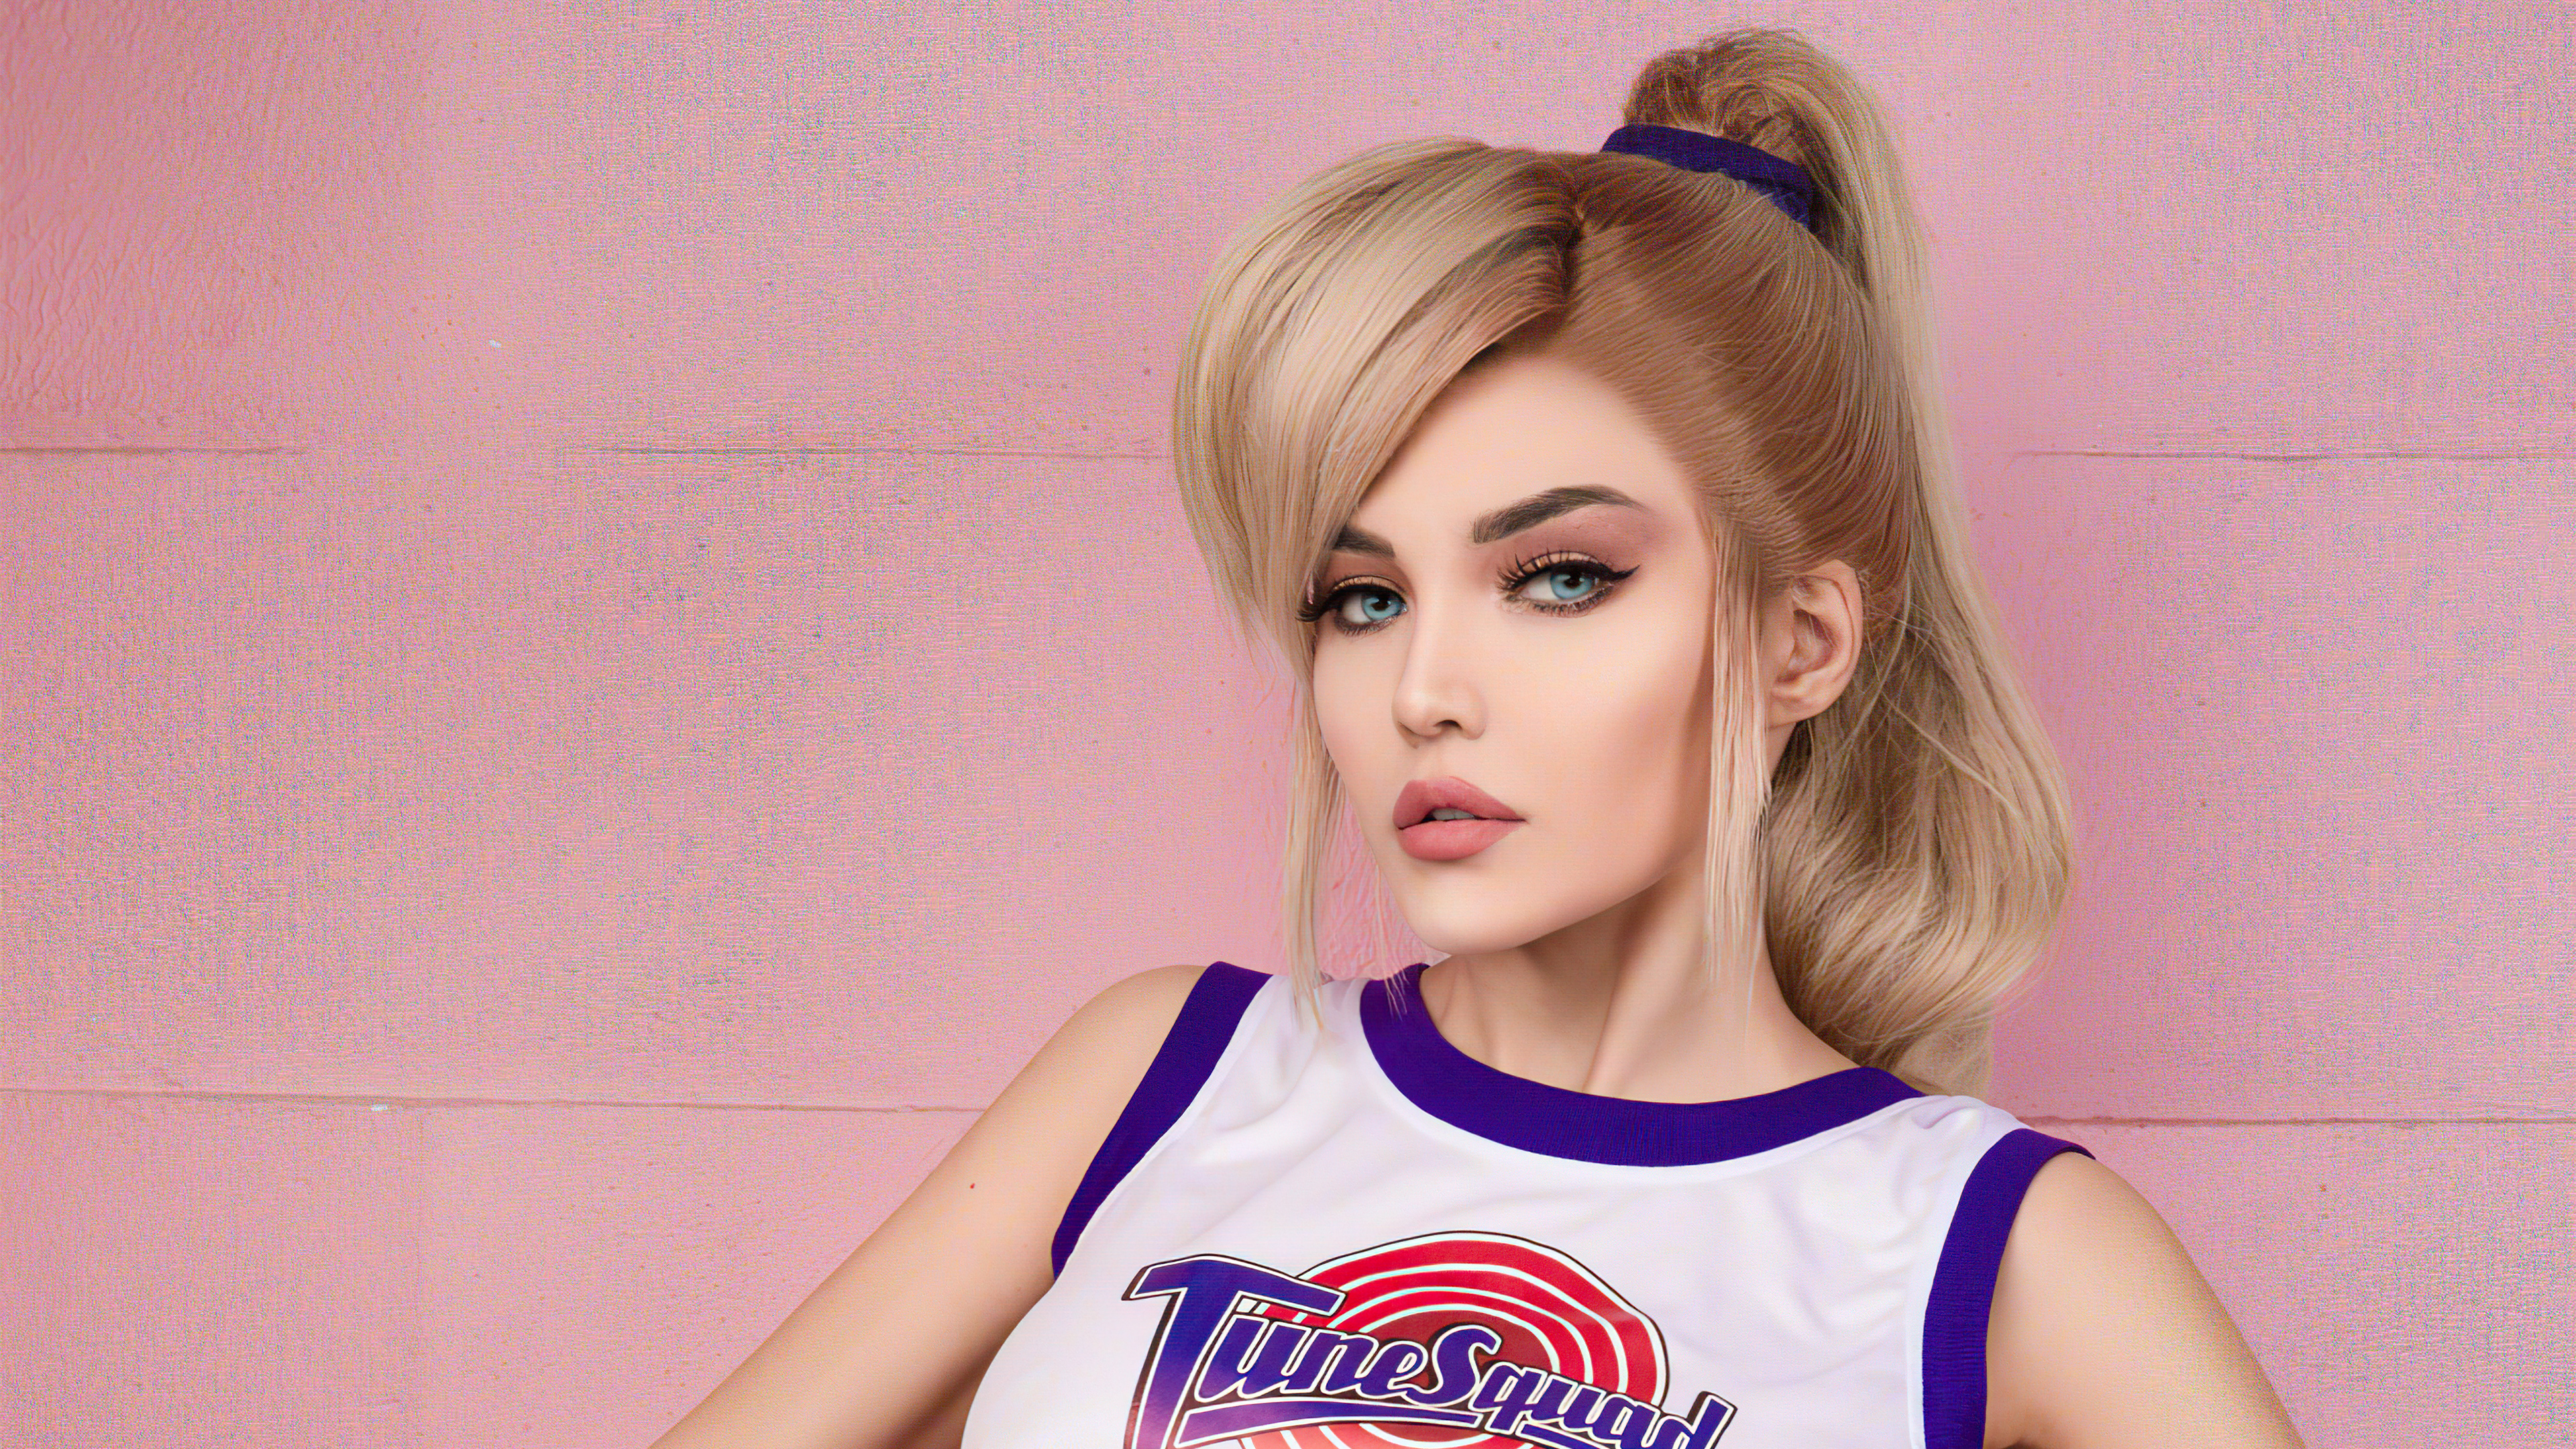 Lola Bunny Space Jam Cosplay 4k Hd Movies 4k Wallpapers Images Backgrounds Photos And Pictures